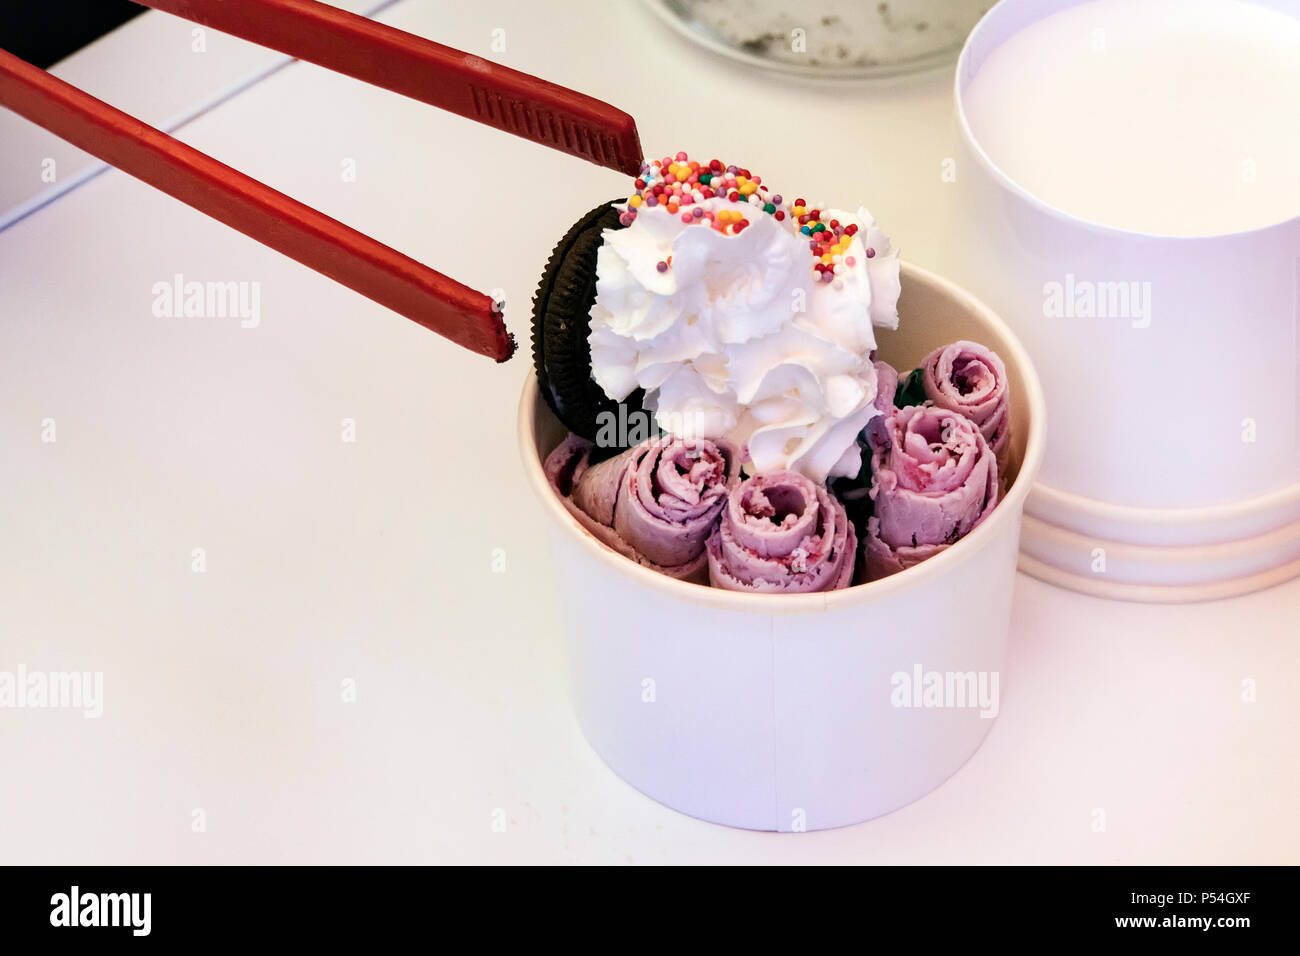 https://c8.alamy.com/comp/P54GXF/stir-fried-ice-cream-rolls-at-freeze-pan-rolled-ice-cream-hand-made-ice-cream-dessert-fried-ice-cream-machine-with-steel-chilled-pan-cooking-proce-P54GXF.jpg